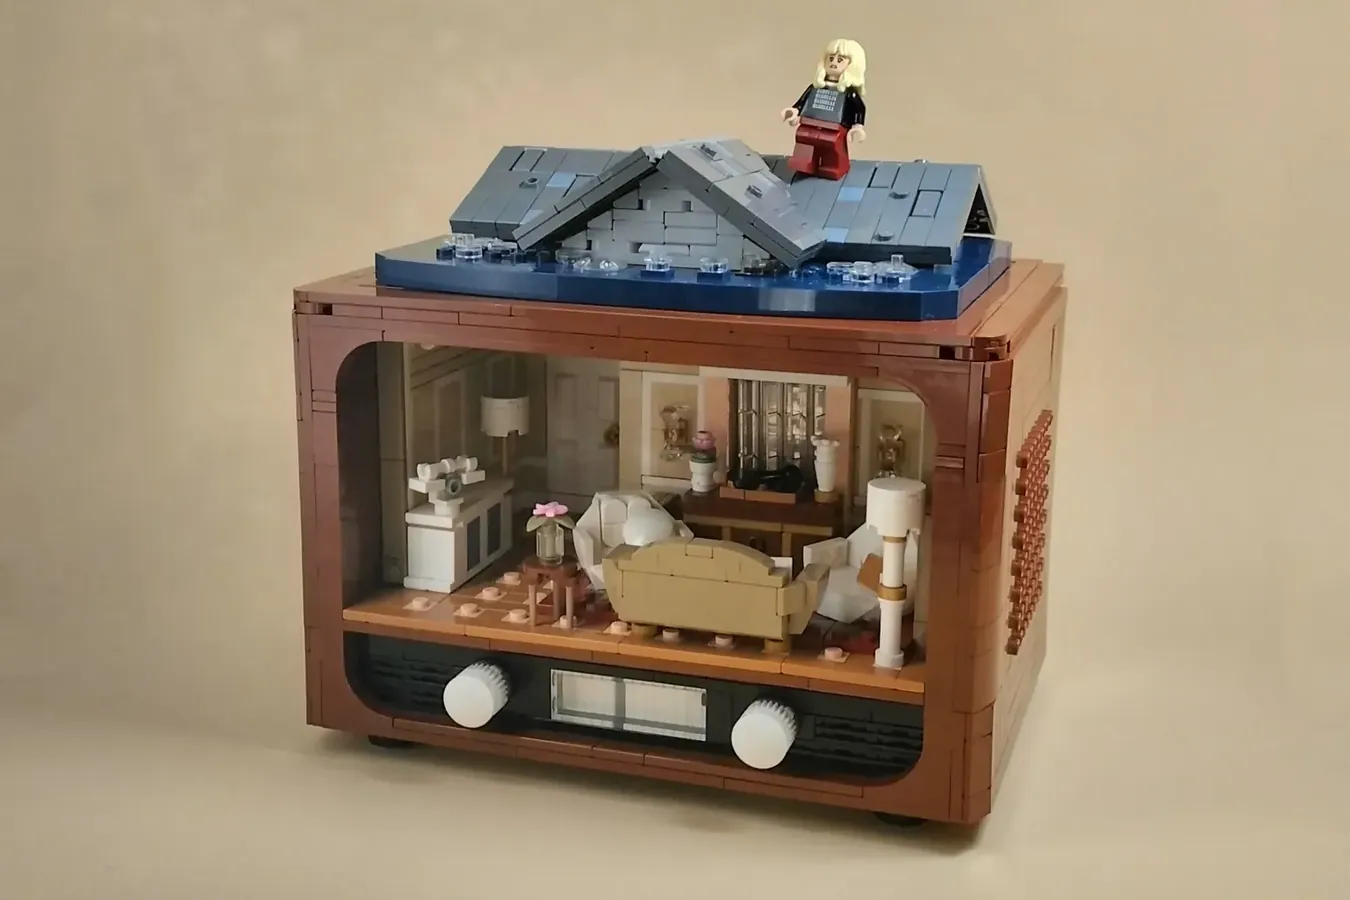 LEGO Ideas Happier Than Ever project